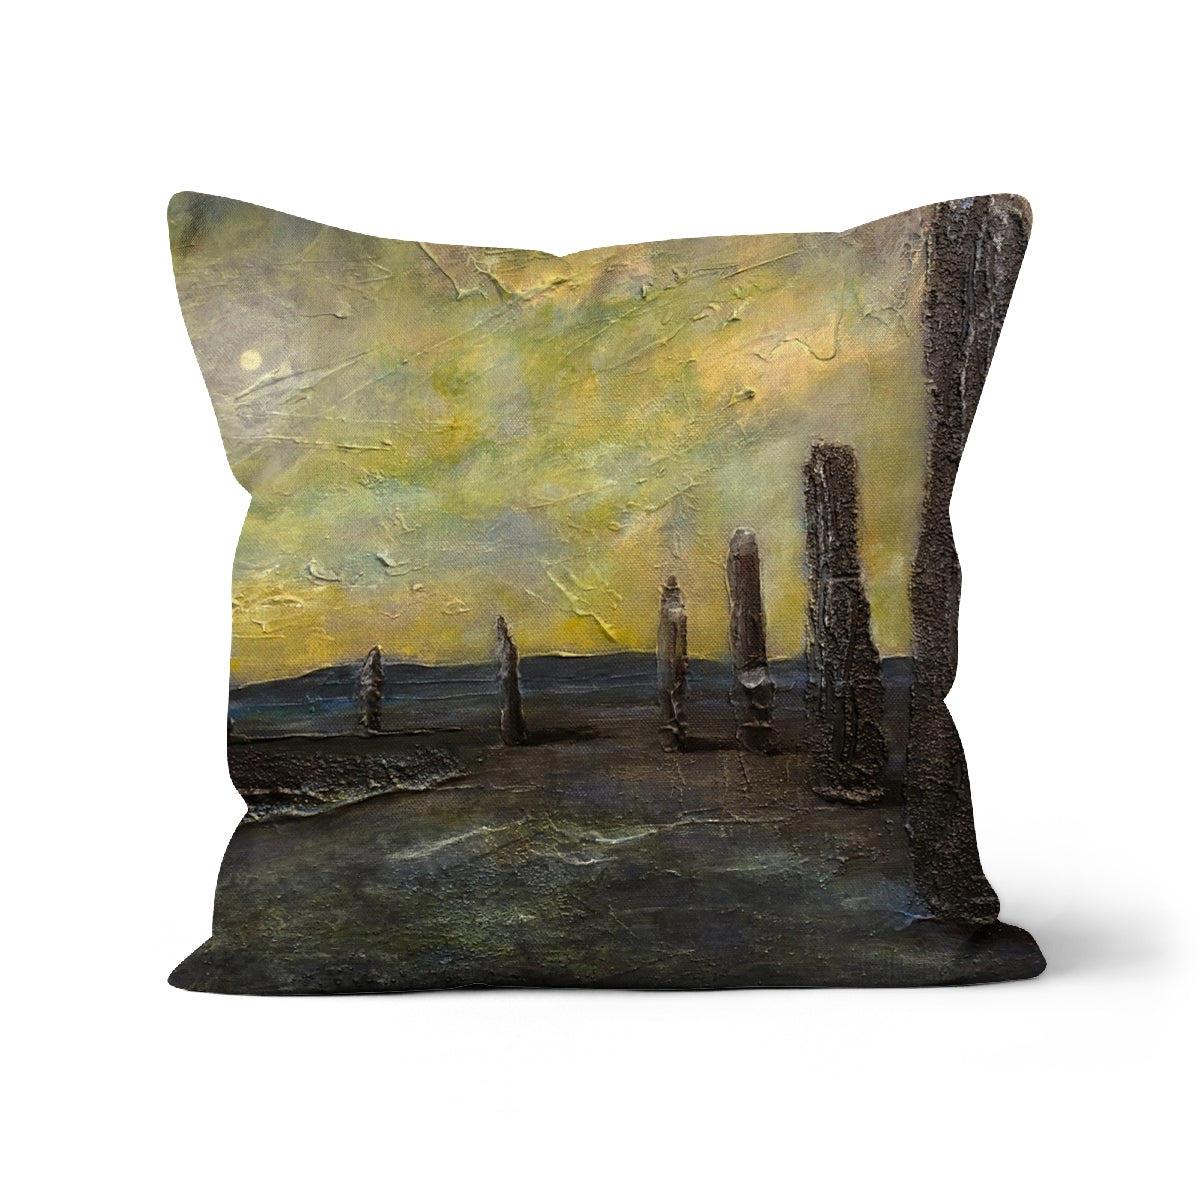 An Ethereal Ring Of Brodgar Art Gifts Cushion-Cushions-Orkney Art Gallery-Linen-12"x12"-Paintings, Prints, Homeware, Art Gifts From Scotland By Scottish Artist Kevin Hunter